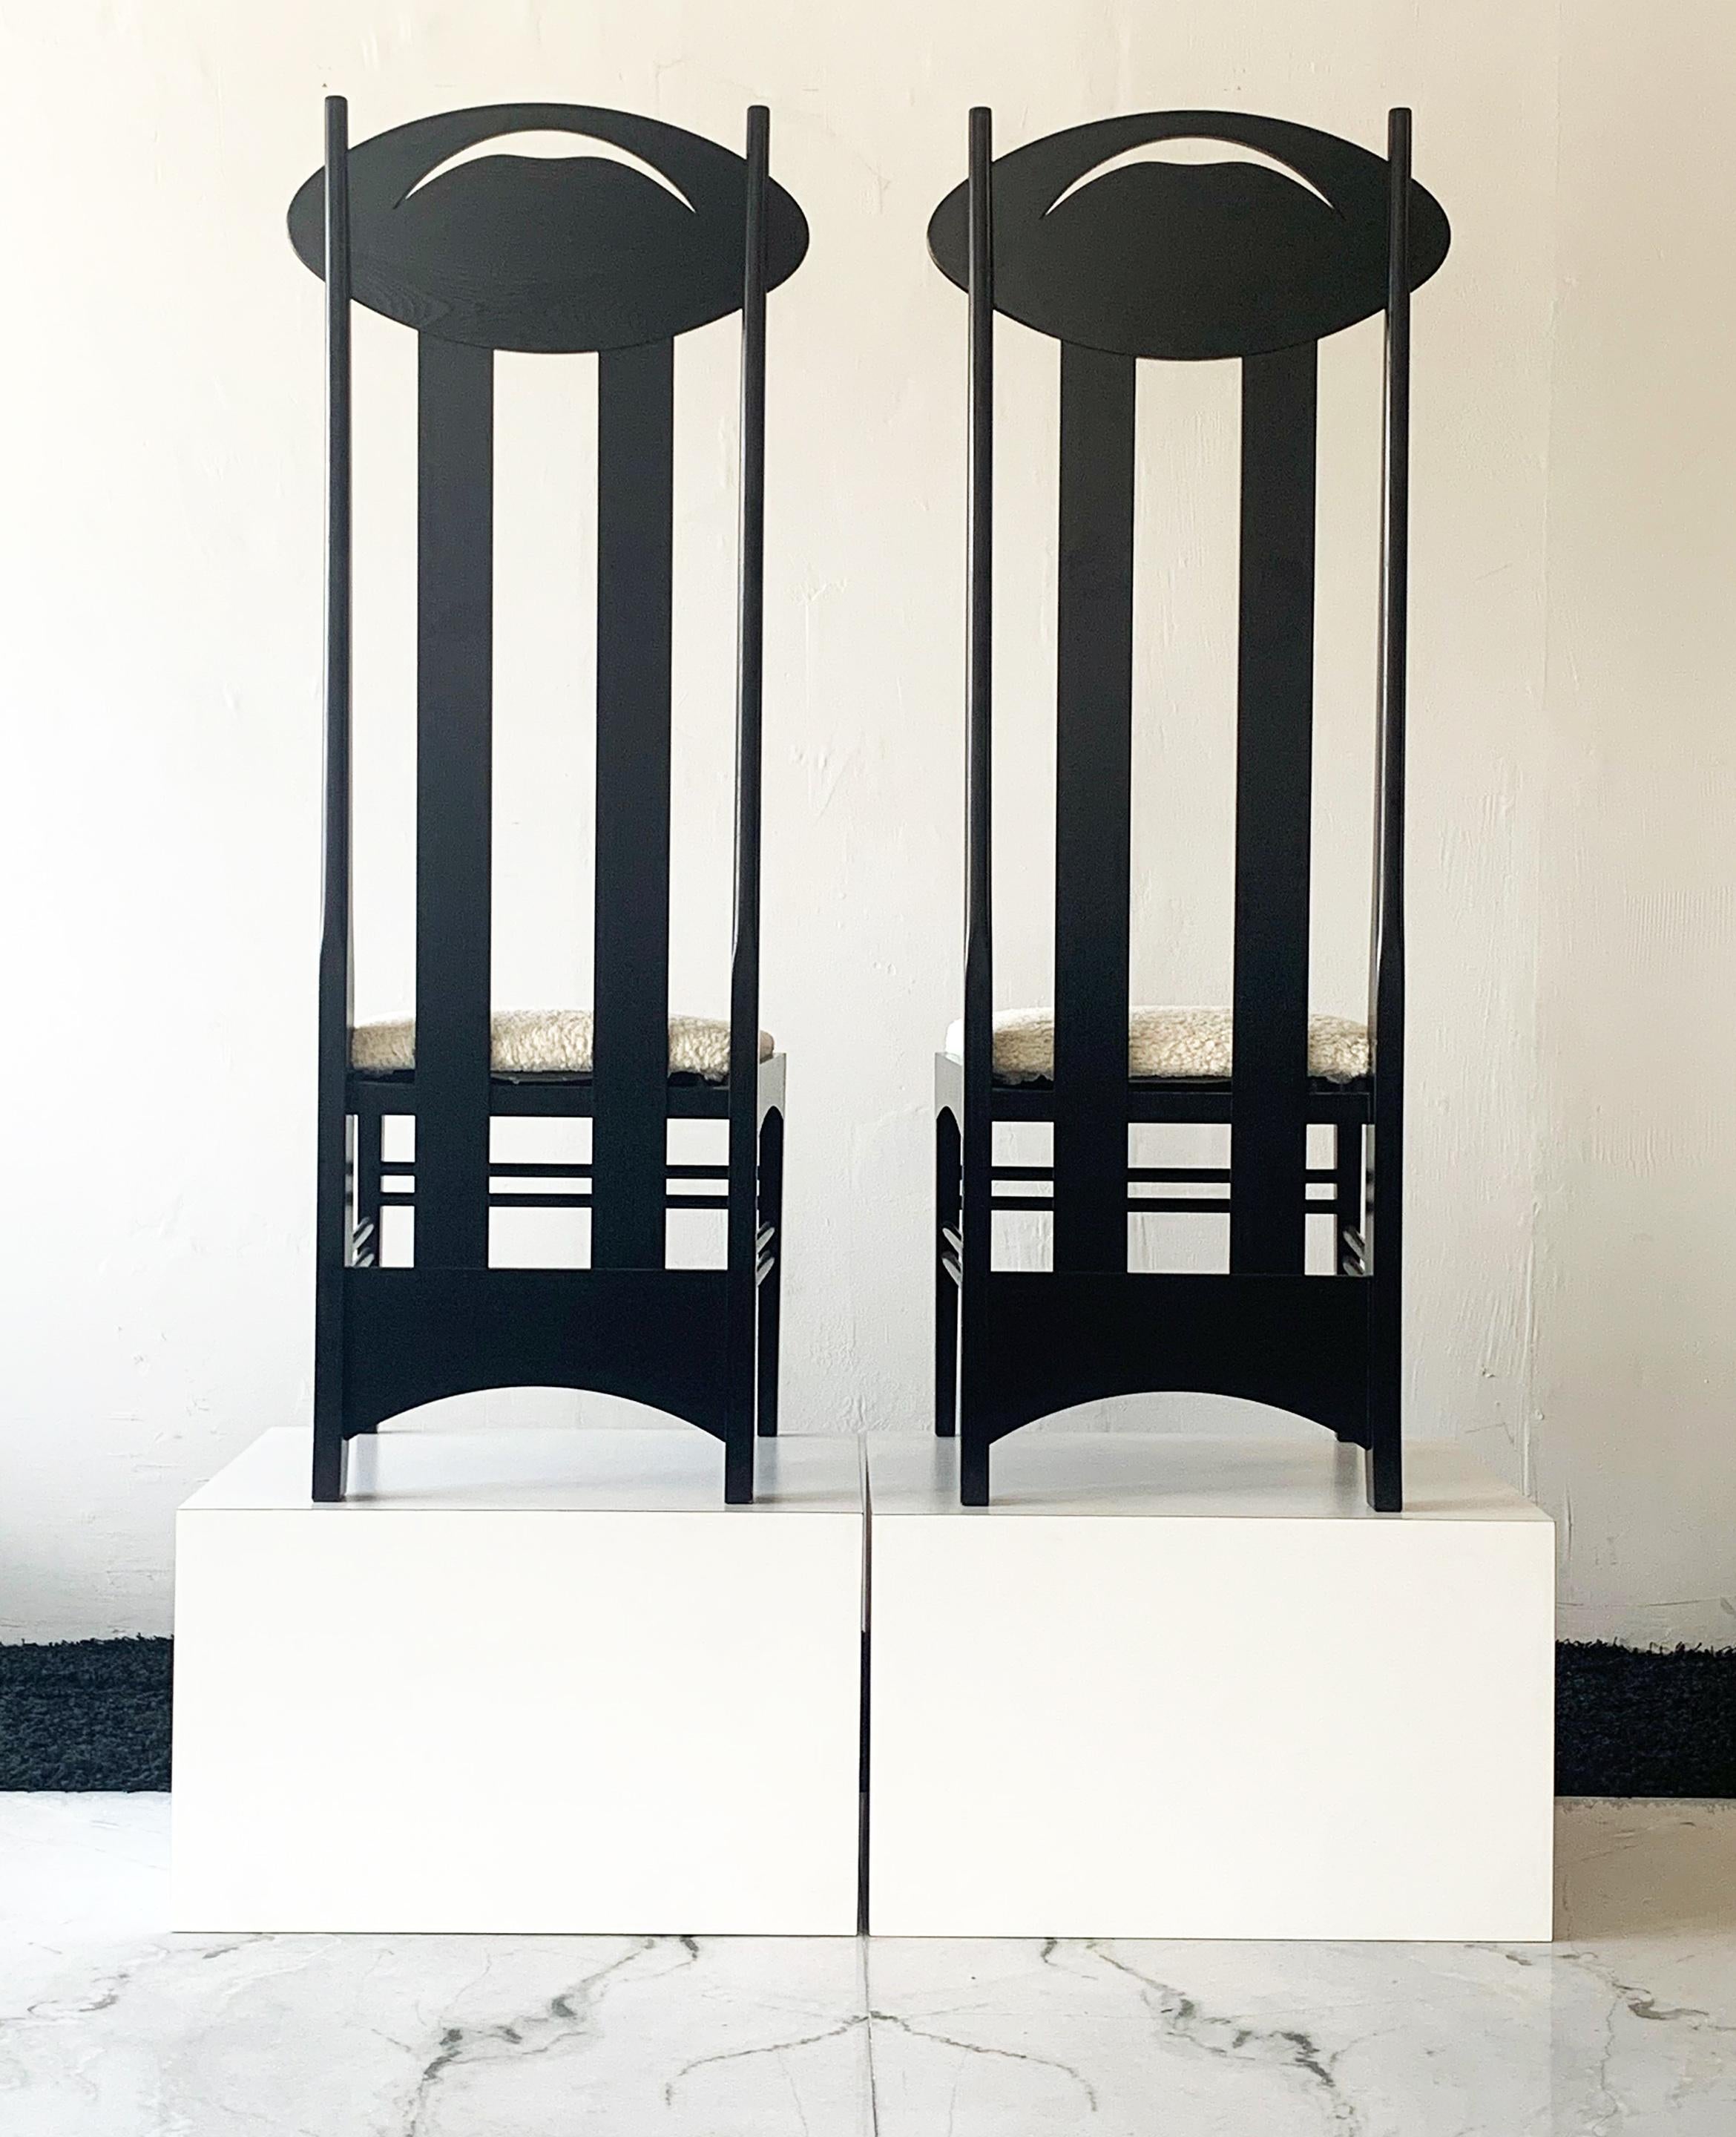 These chairs are absolutely stunning. A pair of iconic Charles Rennie Mackintosh Argyle chairs upholstered in white boucle. The Charles Rennie Mackintosh Argyle Chair was designed for Miss Cranston's Tea Rooms in Argyle Street, Glasgow. The high